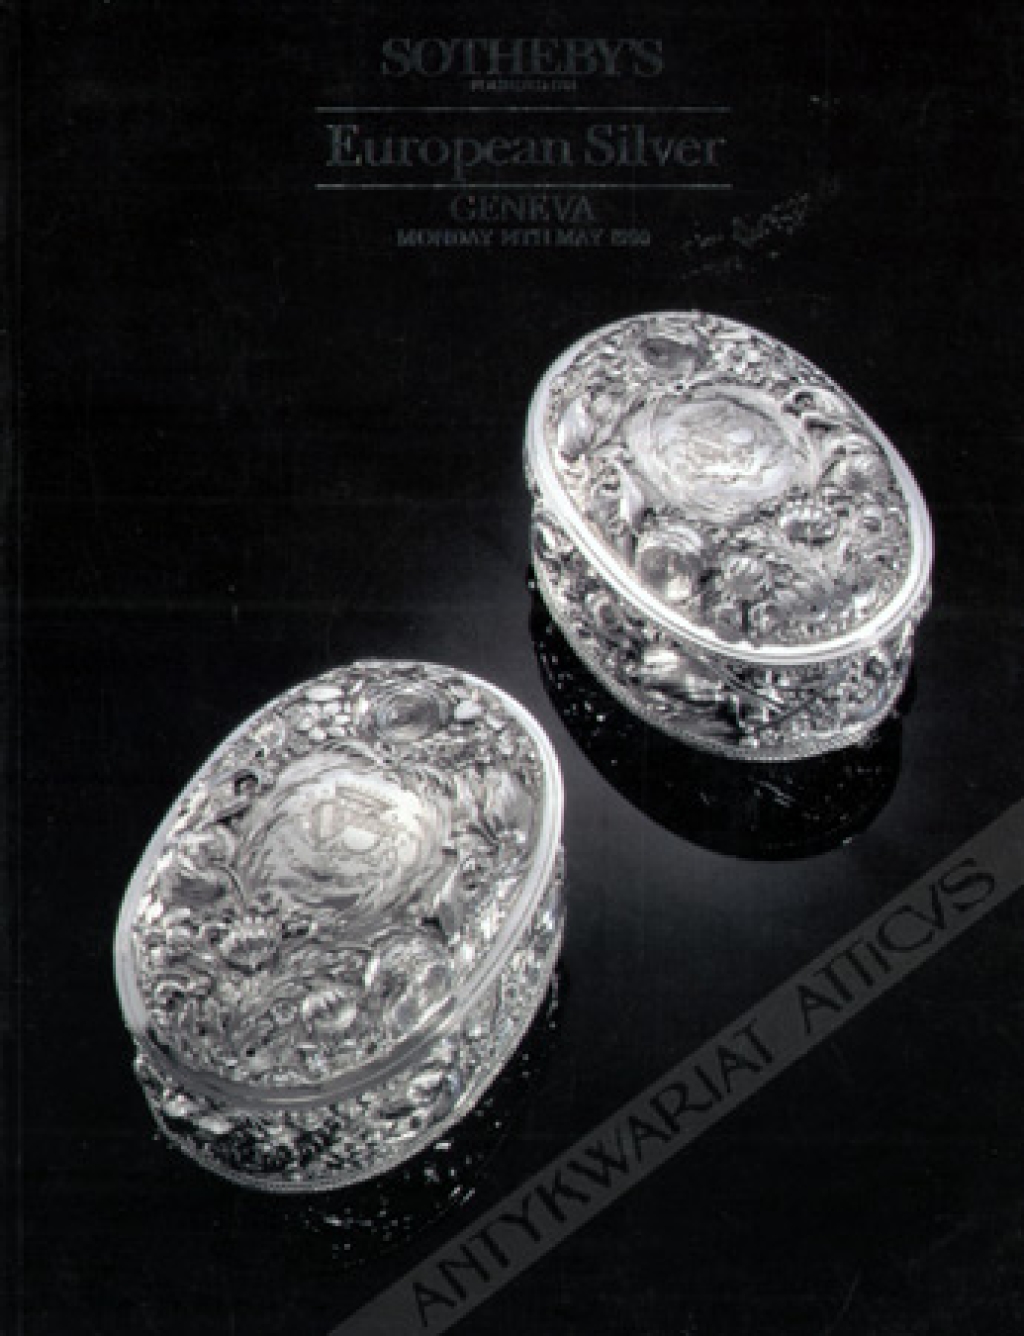 [katalog aukcyjny] Sotheby's Founded 1744. European silver Geneva,14th May 1990. Day of Sale: Monday 14th May 1990 at 17.00 hours par le ministère de Me Claude Naville, huissier judiciaire.
